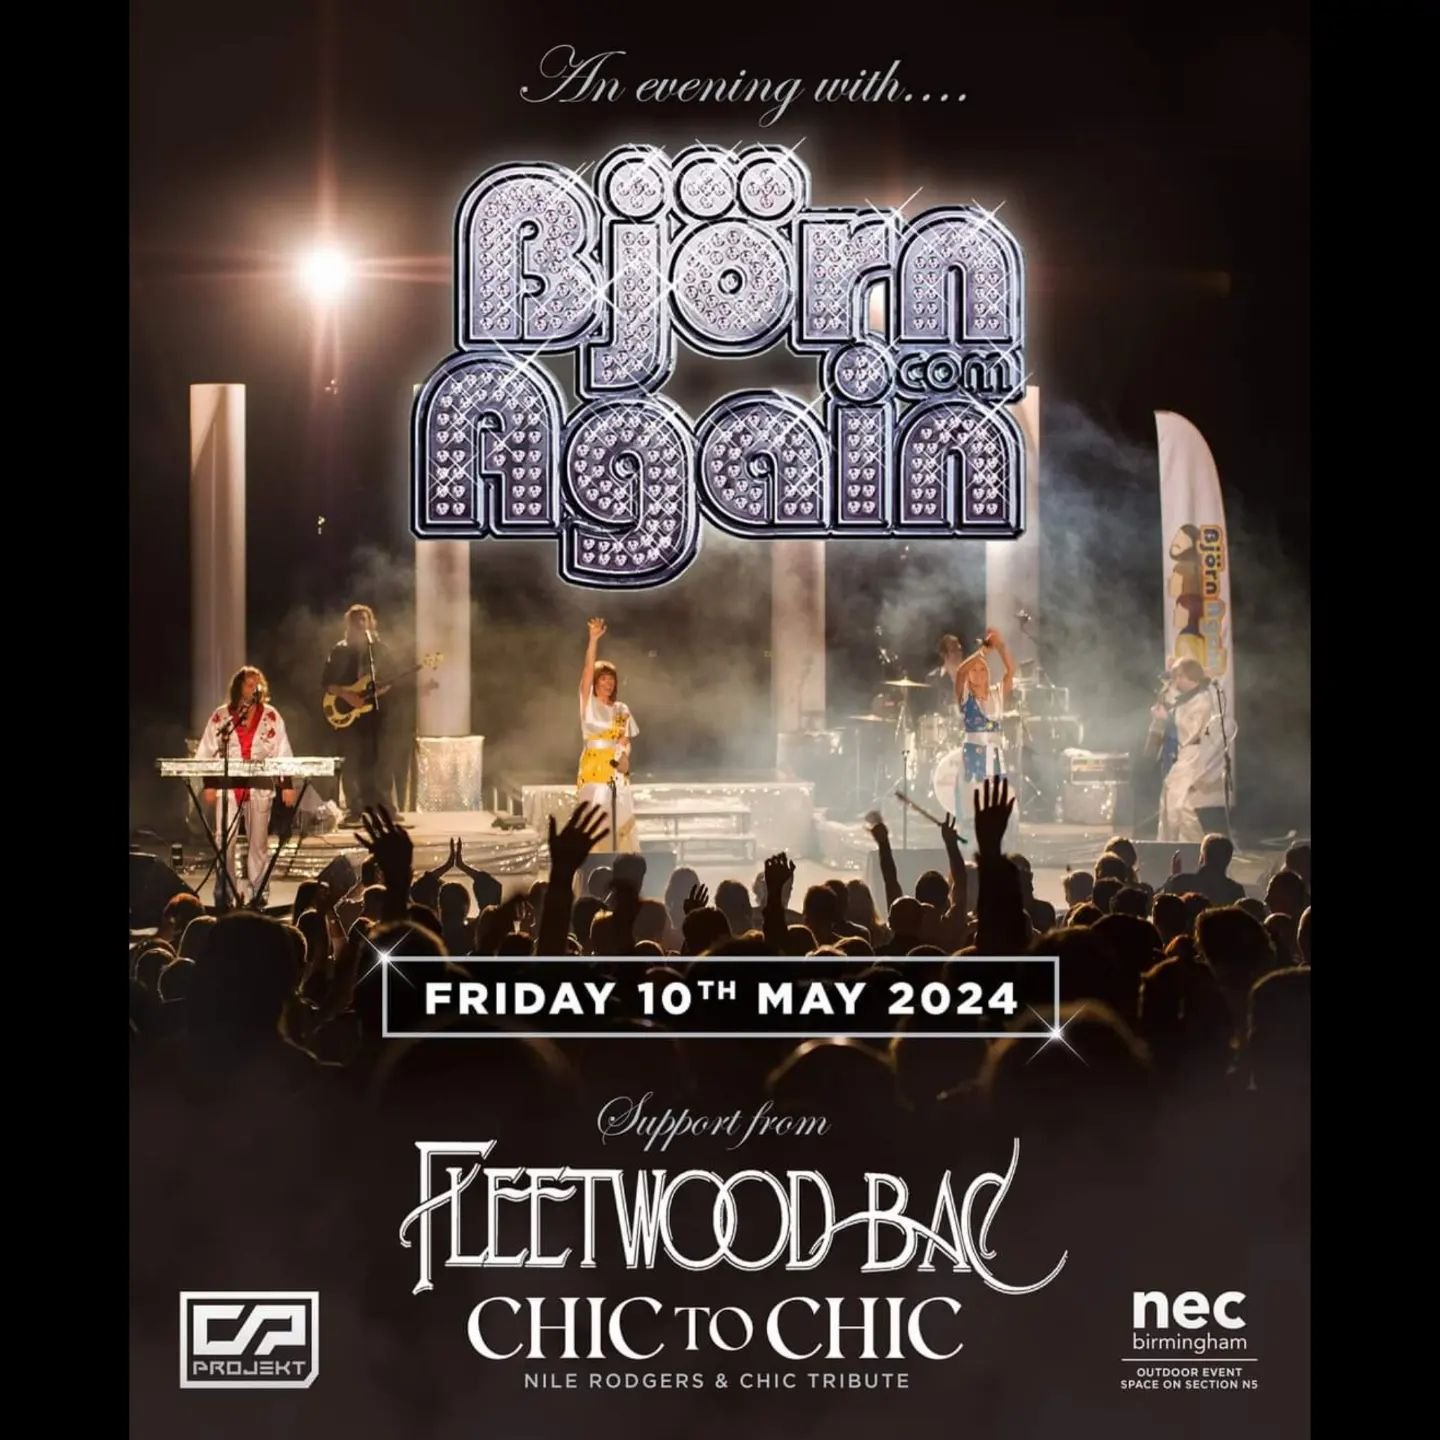 Next, we're heading to @necbirmingham on the 10th of May, supporting @bjornagainofficial &amp; @fleetwoodbactribute It's going to be a great night! 

Tickets are still available here 👇🏻👇🏻
https://www.thenec.co.uk/whats-on/bjorn-again/

Courtesy o